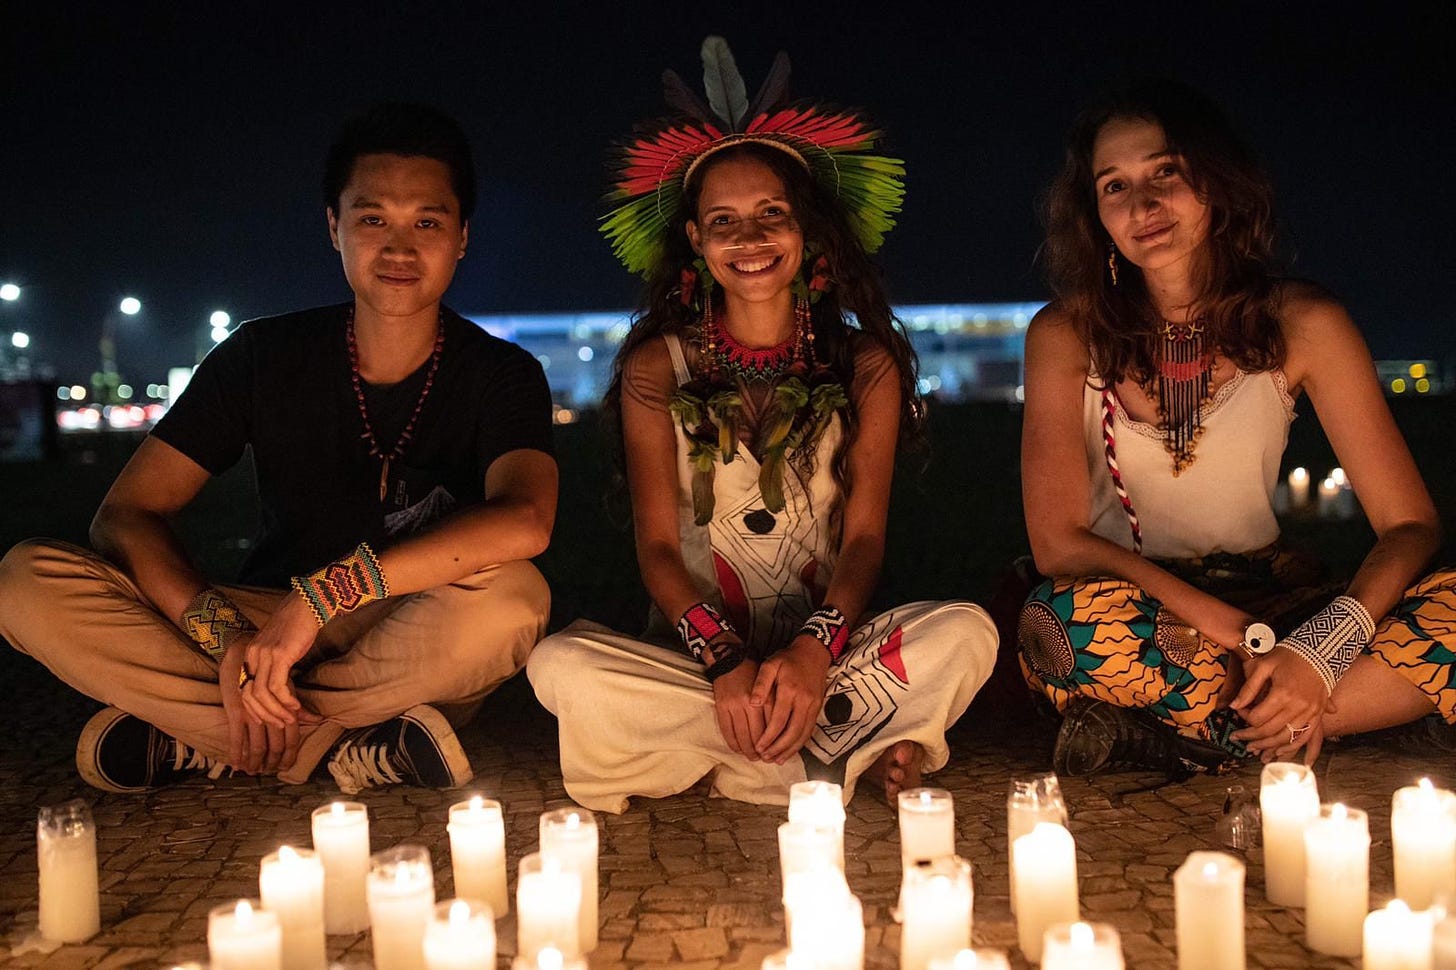 A young man, an indigenous woman and a European woman sit in front of candles and smile at the camera. It is night-time.